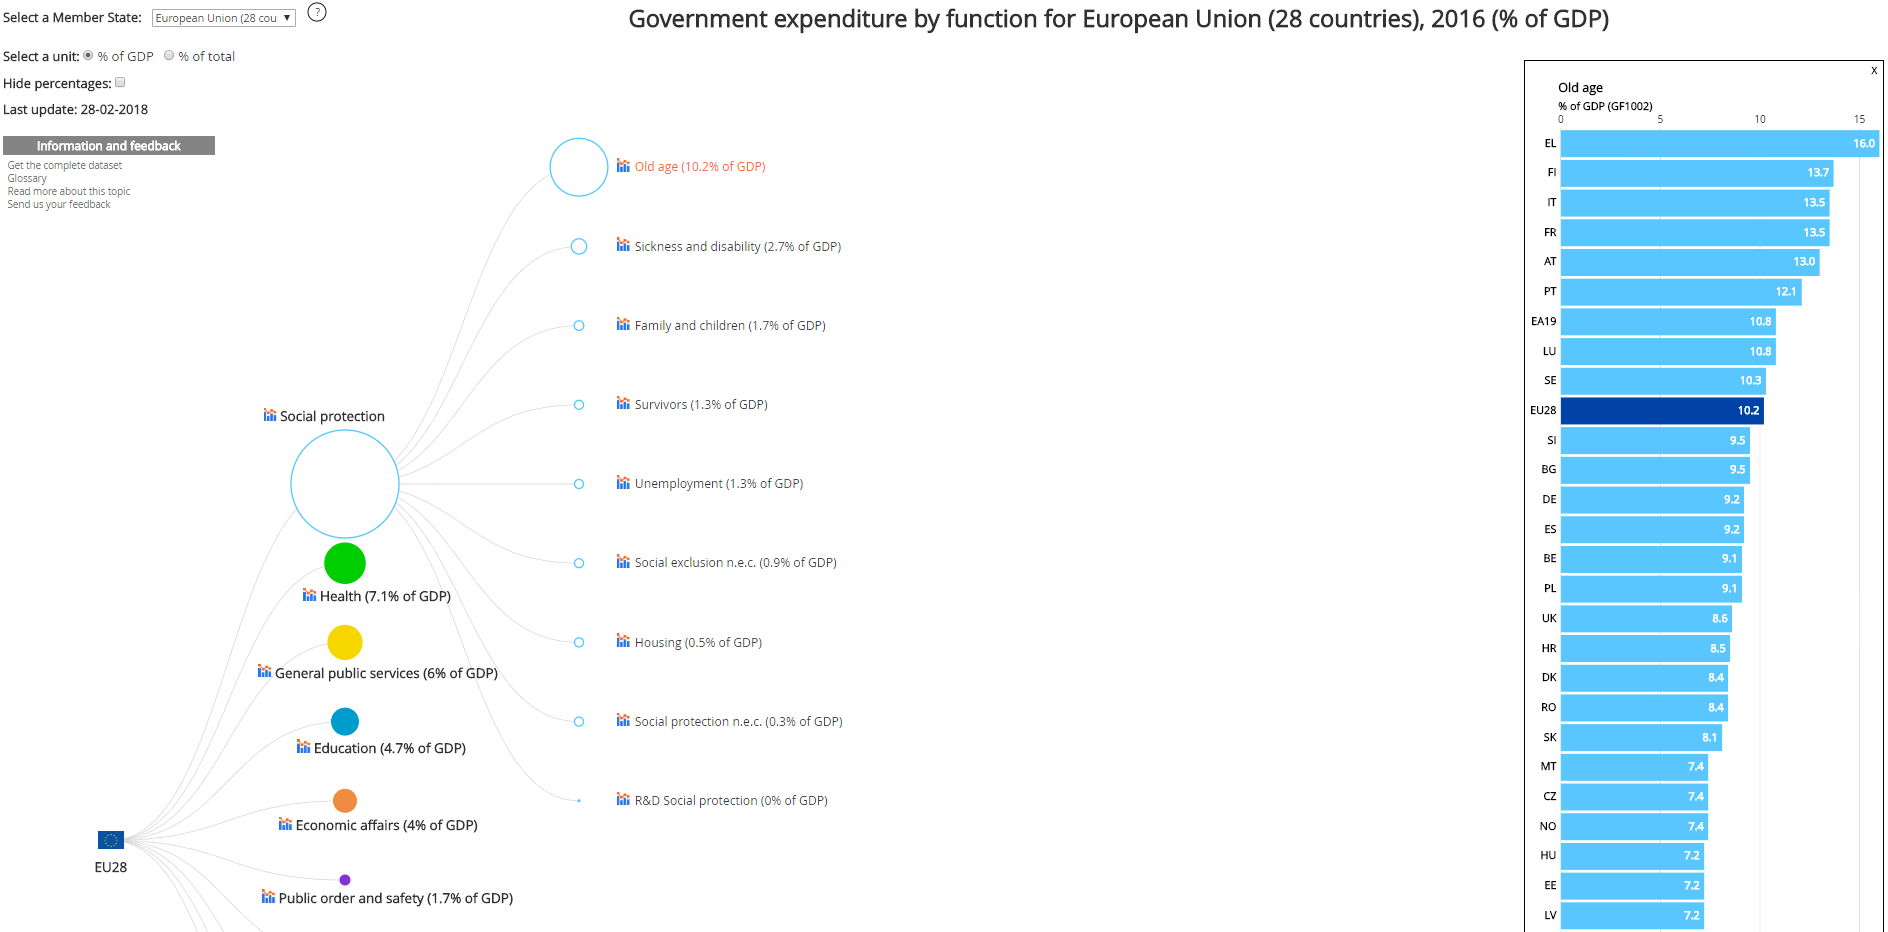 Visualisation: Government expenditure by function, 2016